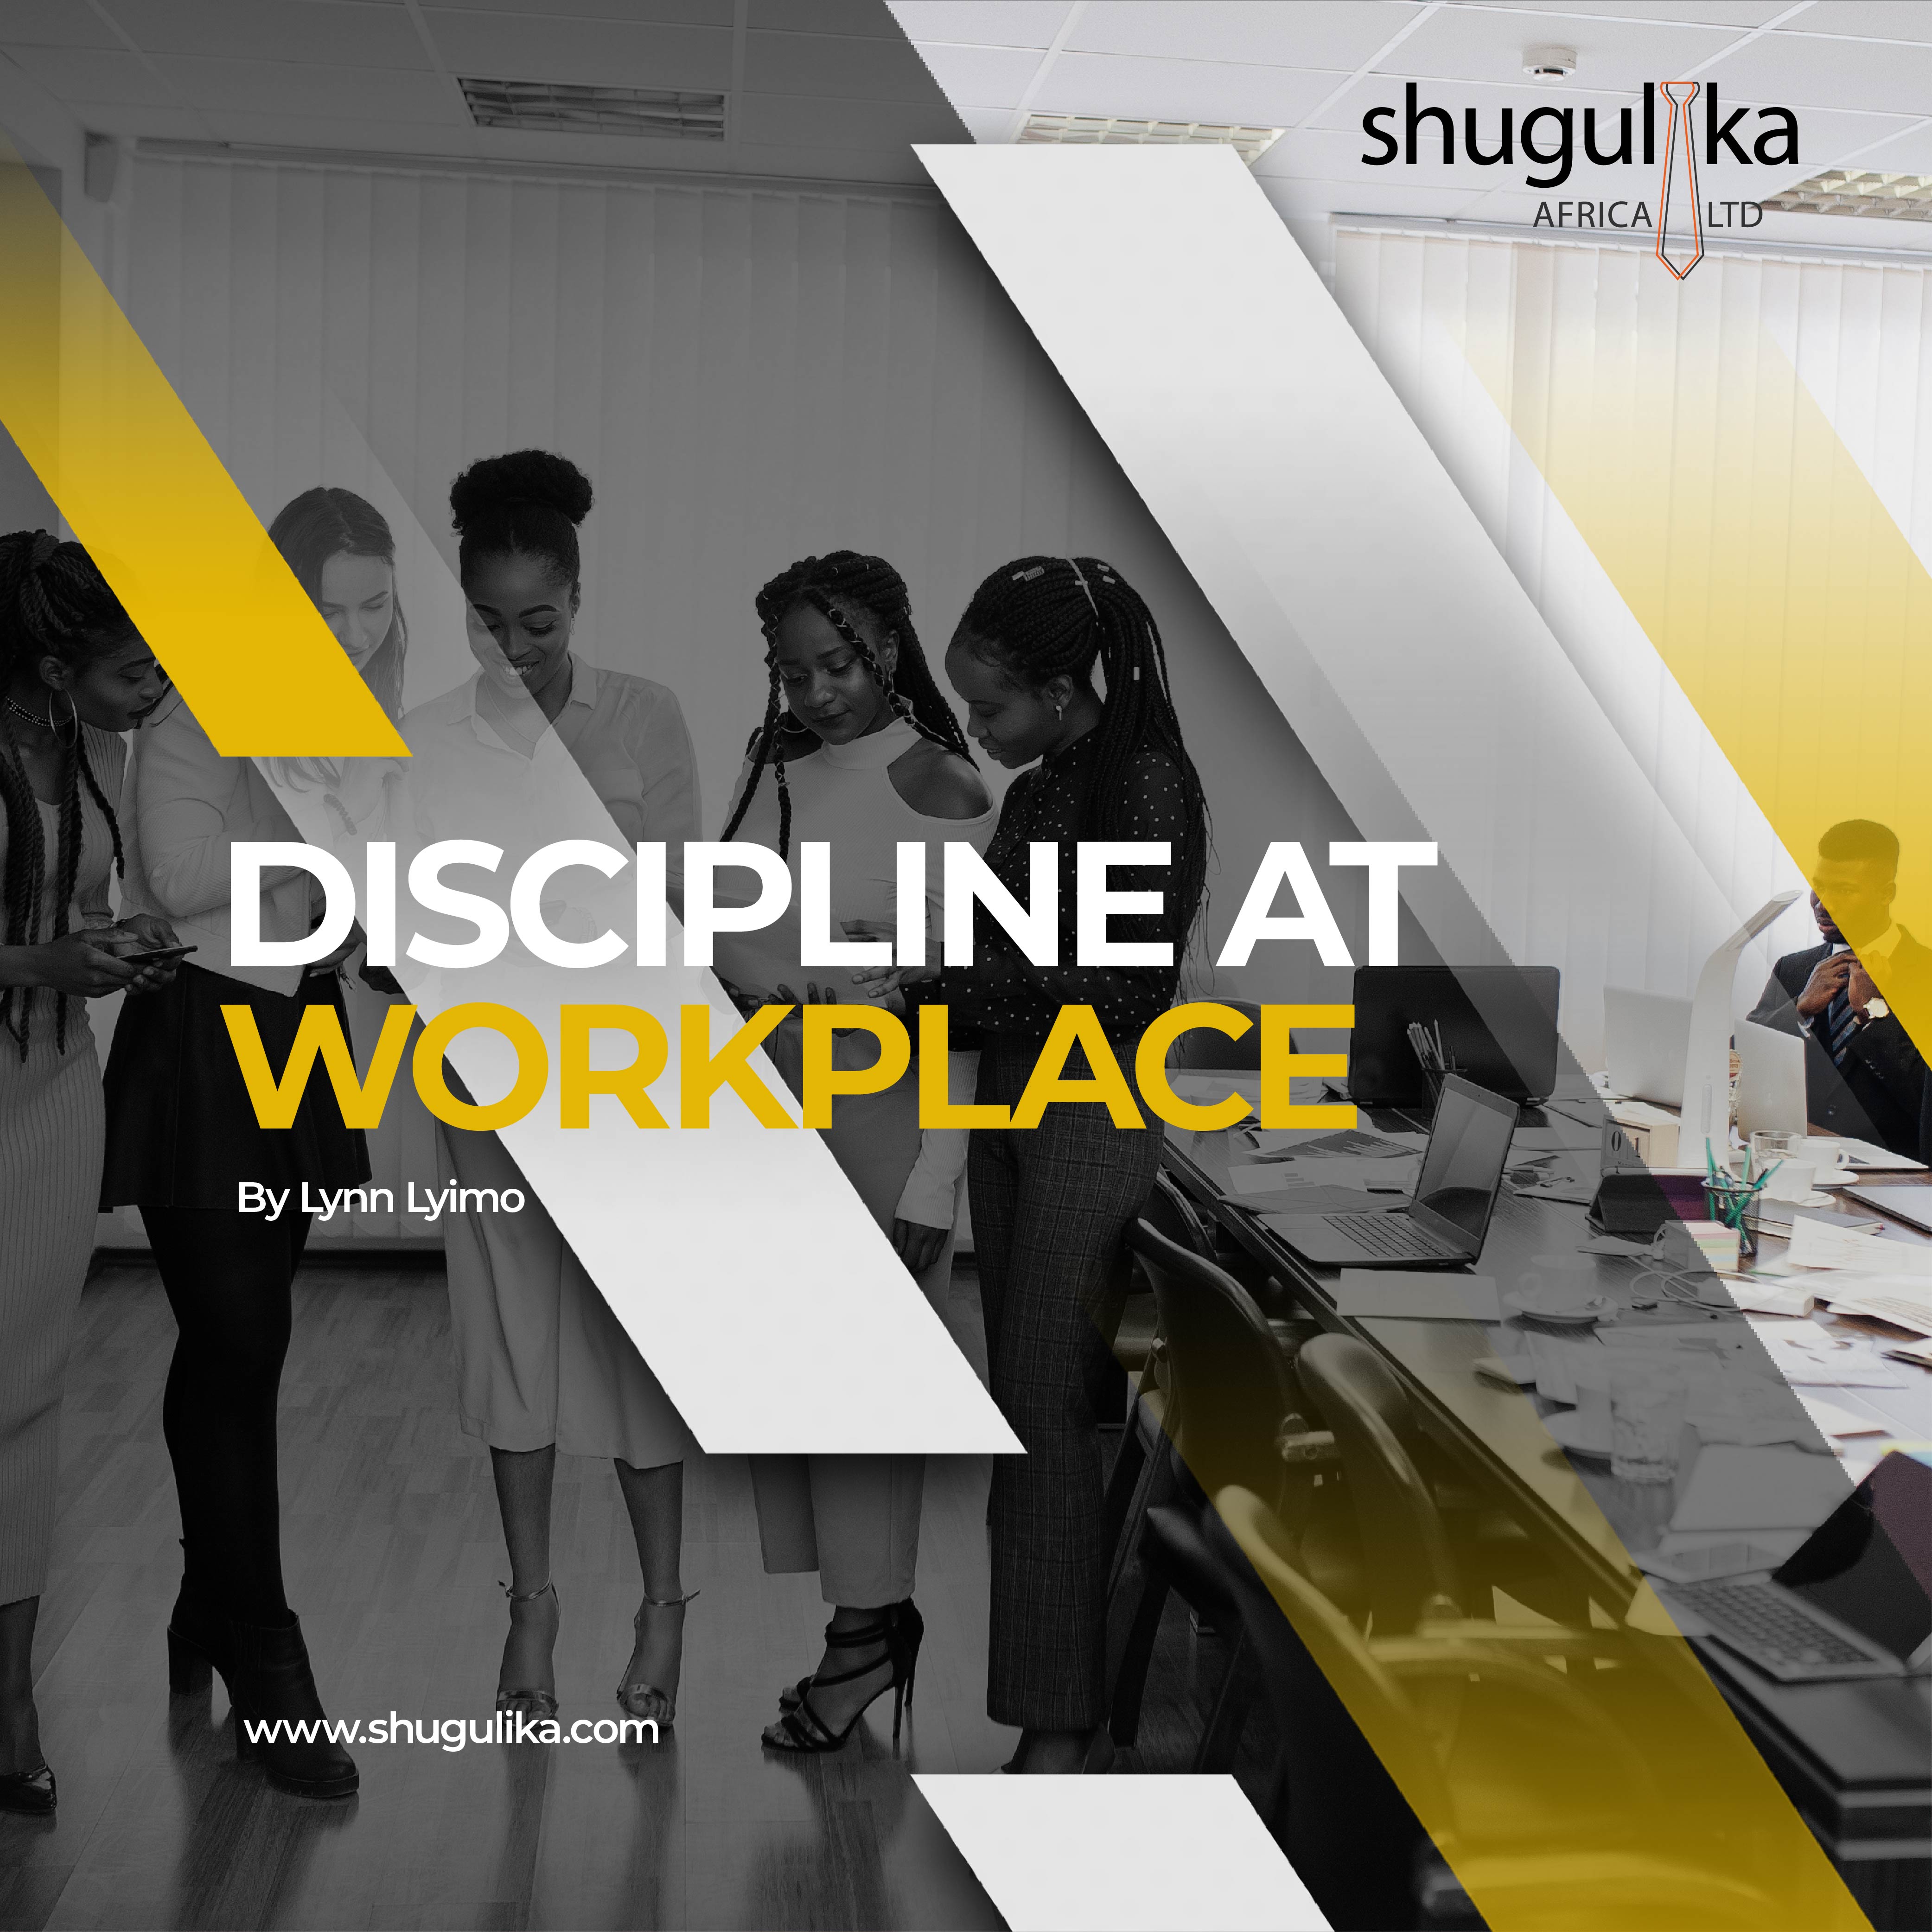 All you need to know about Discipline at Workplace